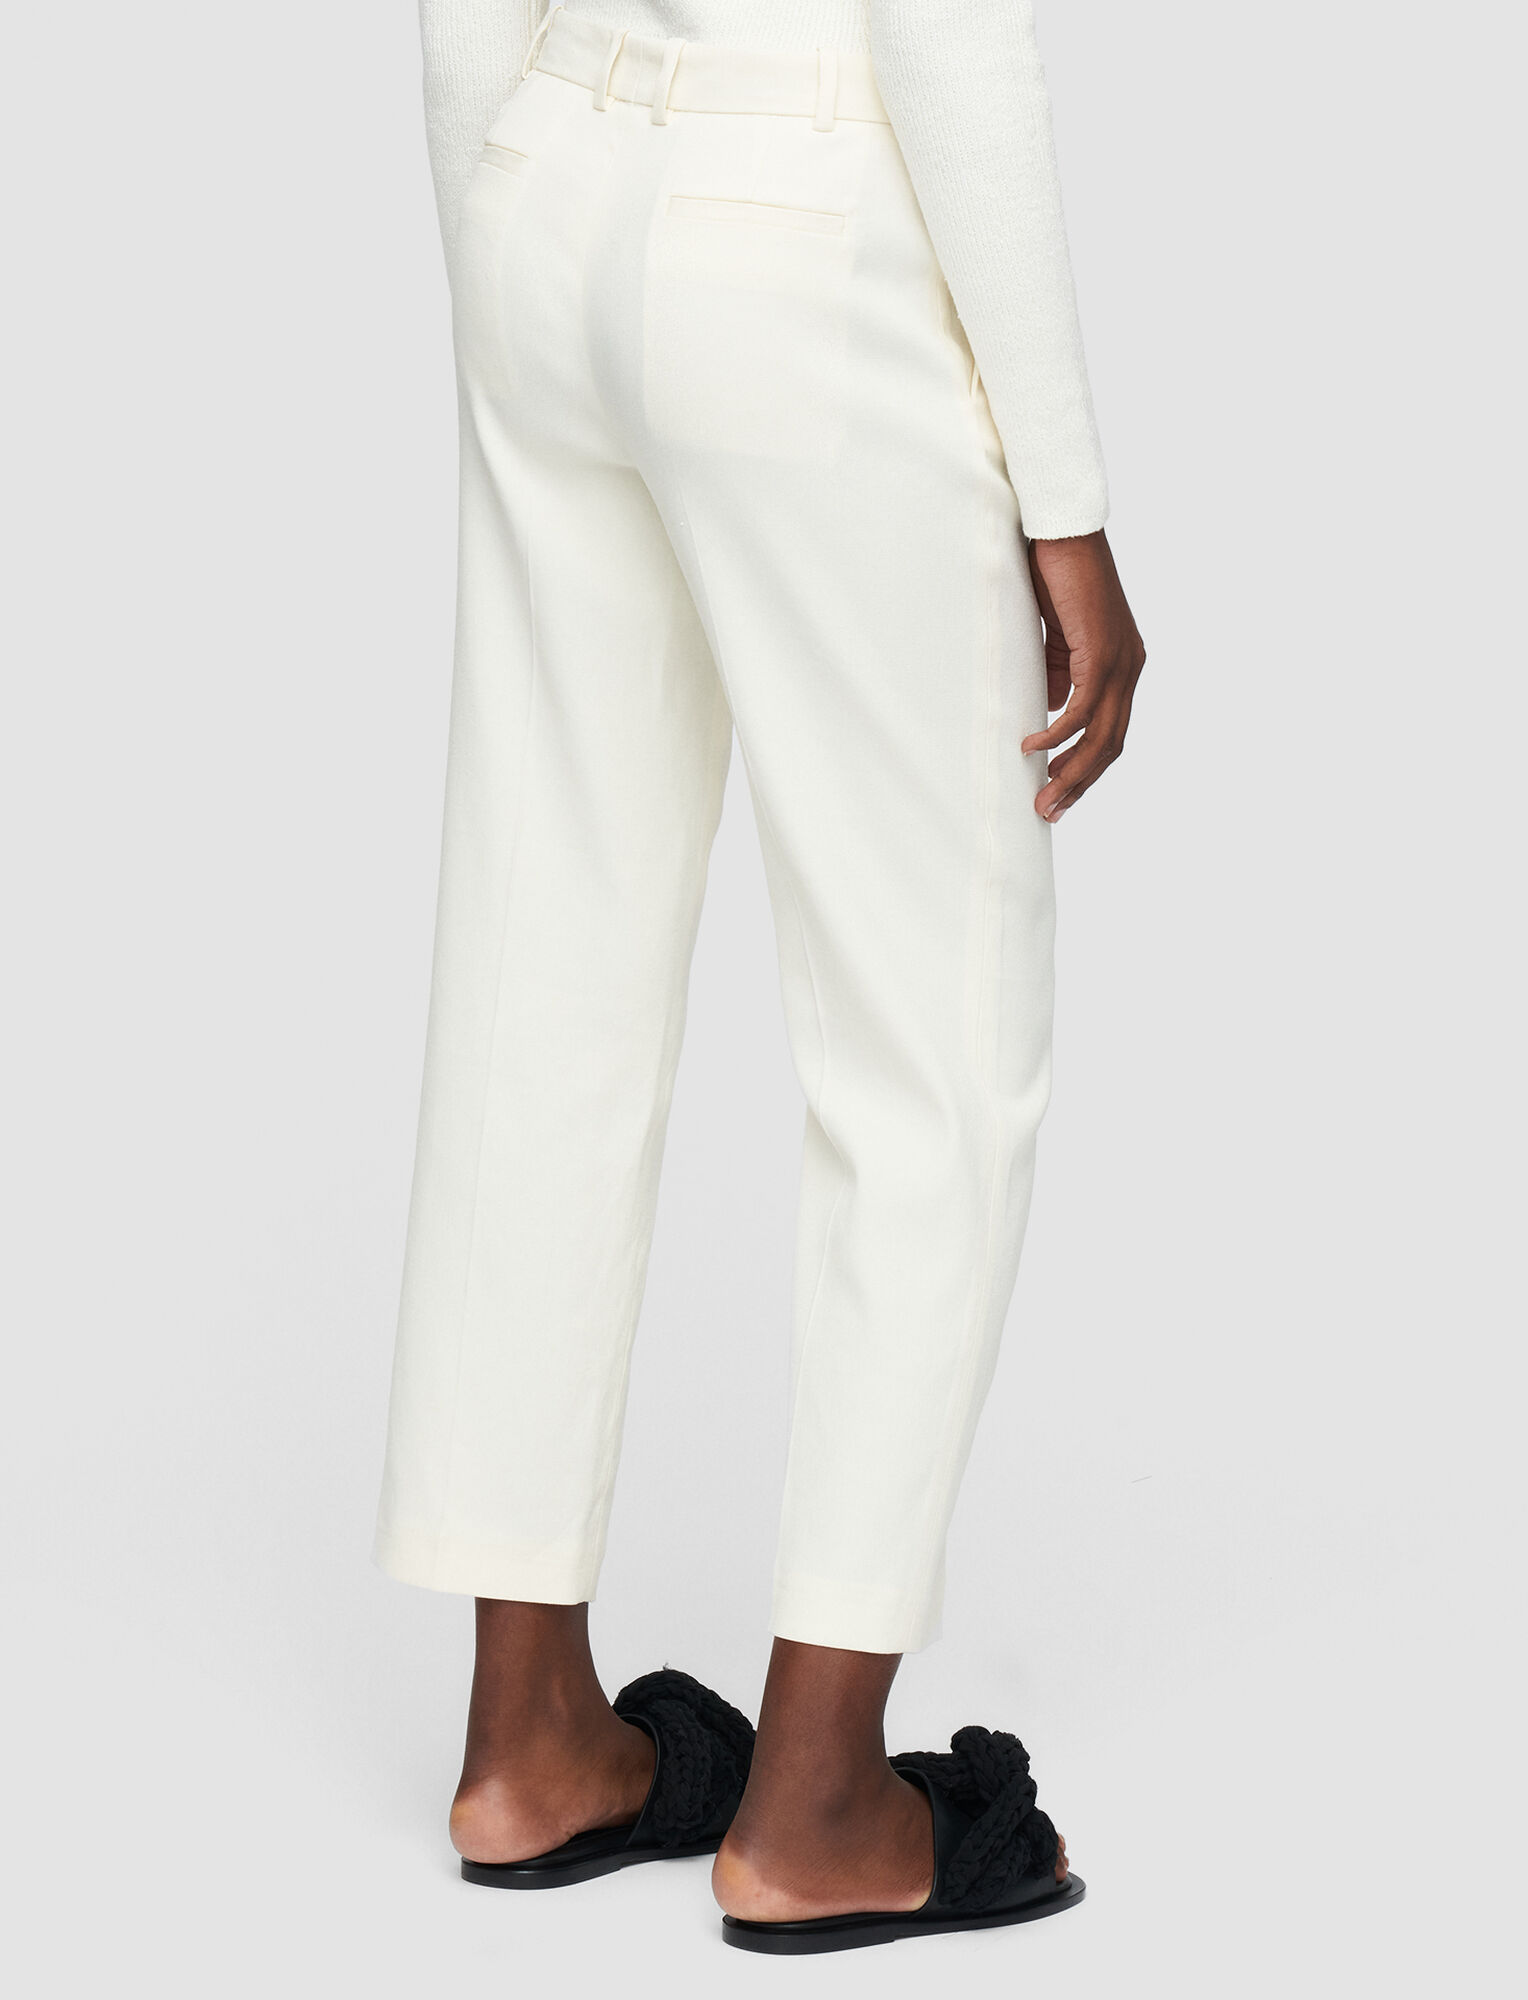 Joseph, Crepe Linen Stretch Trina Trousers, in Ivory